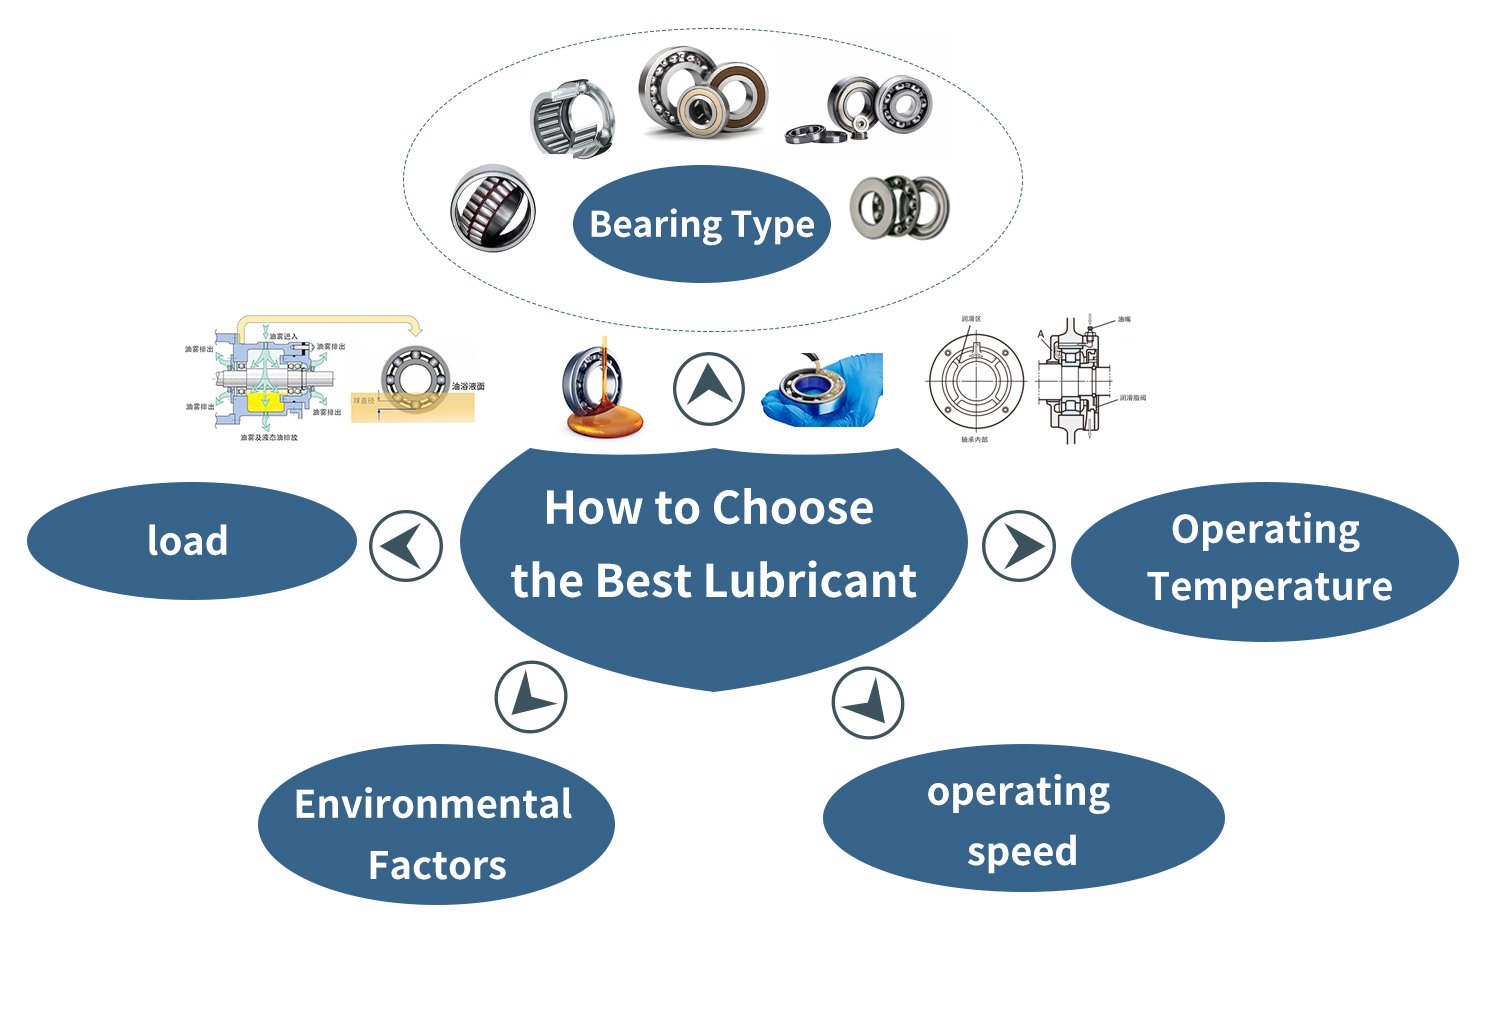 Factors to consider when choosing the best lubricant for bearings